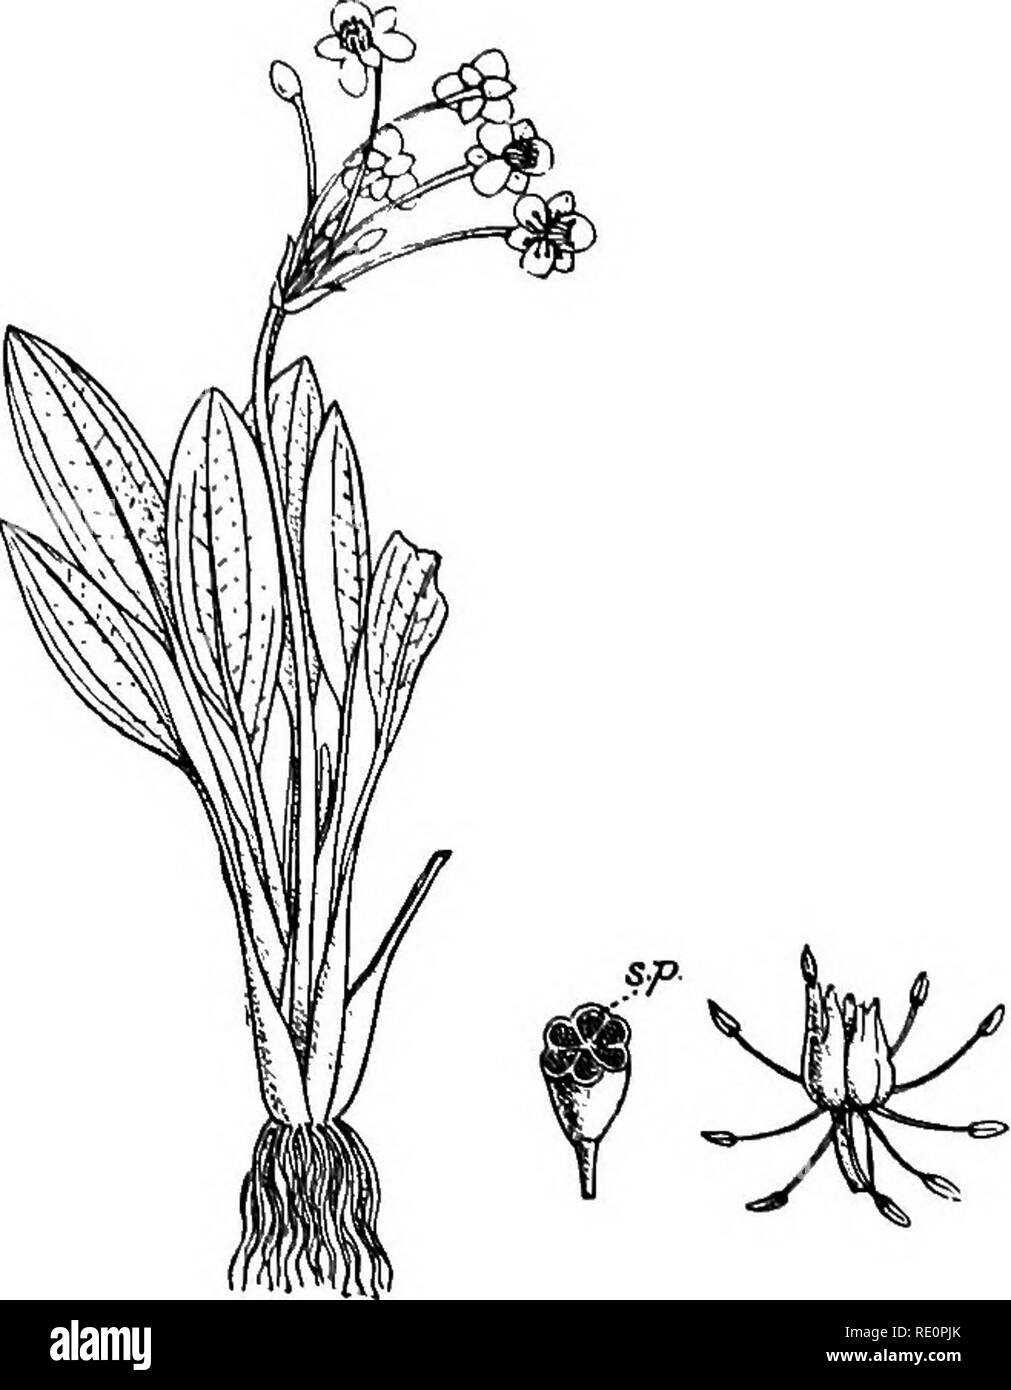 . A manual of Indian botany. Botany. PETALOIDE.E 283 (fig. 256), a common herb of marshes and rice-fields, with elliptic-acute radical leaves, milky juice, herma- phrodite flowers, and many ovules scattered over the inner wall of the carpels (superficial, s.p.). The perianths are petaloid and serve to attract insects. Nat. Order 5. Naiadacece.—Sca- pigerous marshy herbs, either sub- merged or float- ing, with elon- gated branched stems. Flowers hermaphrodite or unisexual, green and inconspicu- ous, in spikes, racemes, or spa- dices. Perianth o, or 4-parted, in- ferior. Stamens I to 6. Pistil o Stock Photo